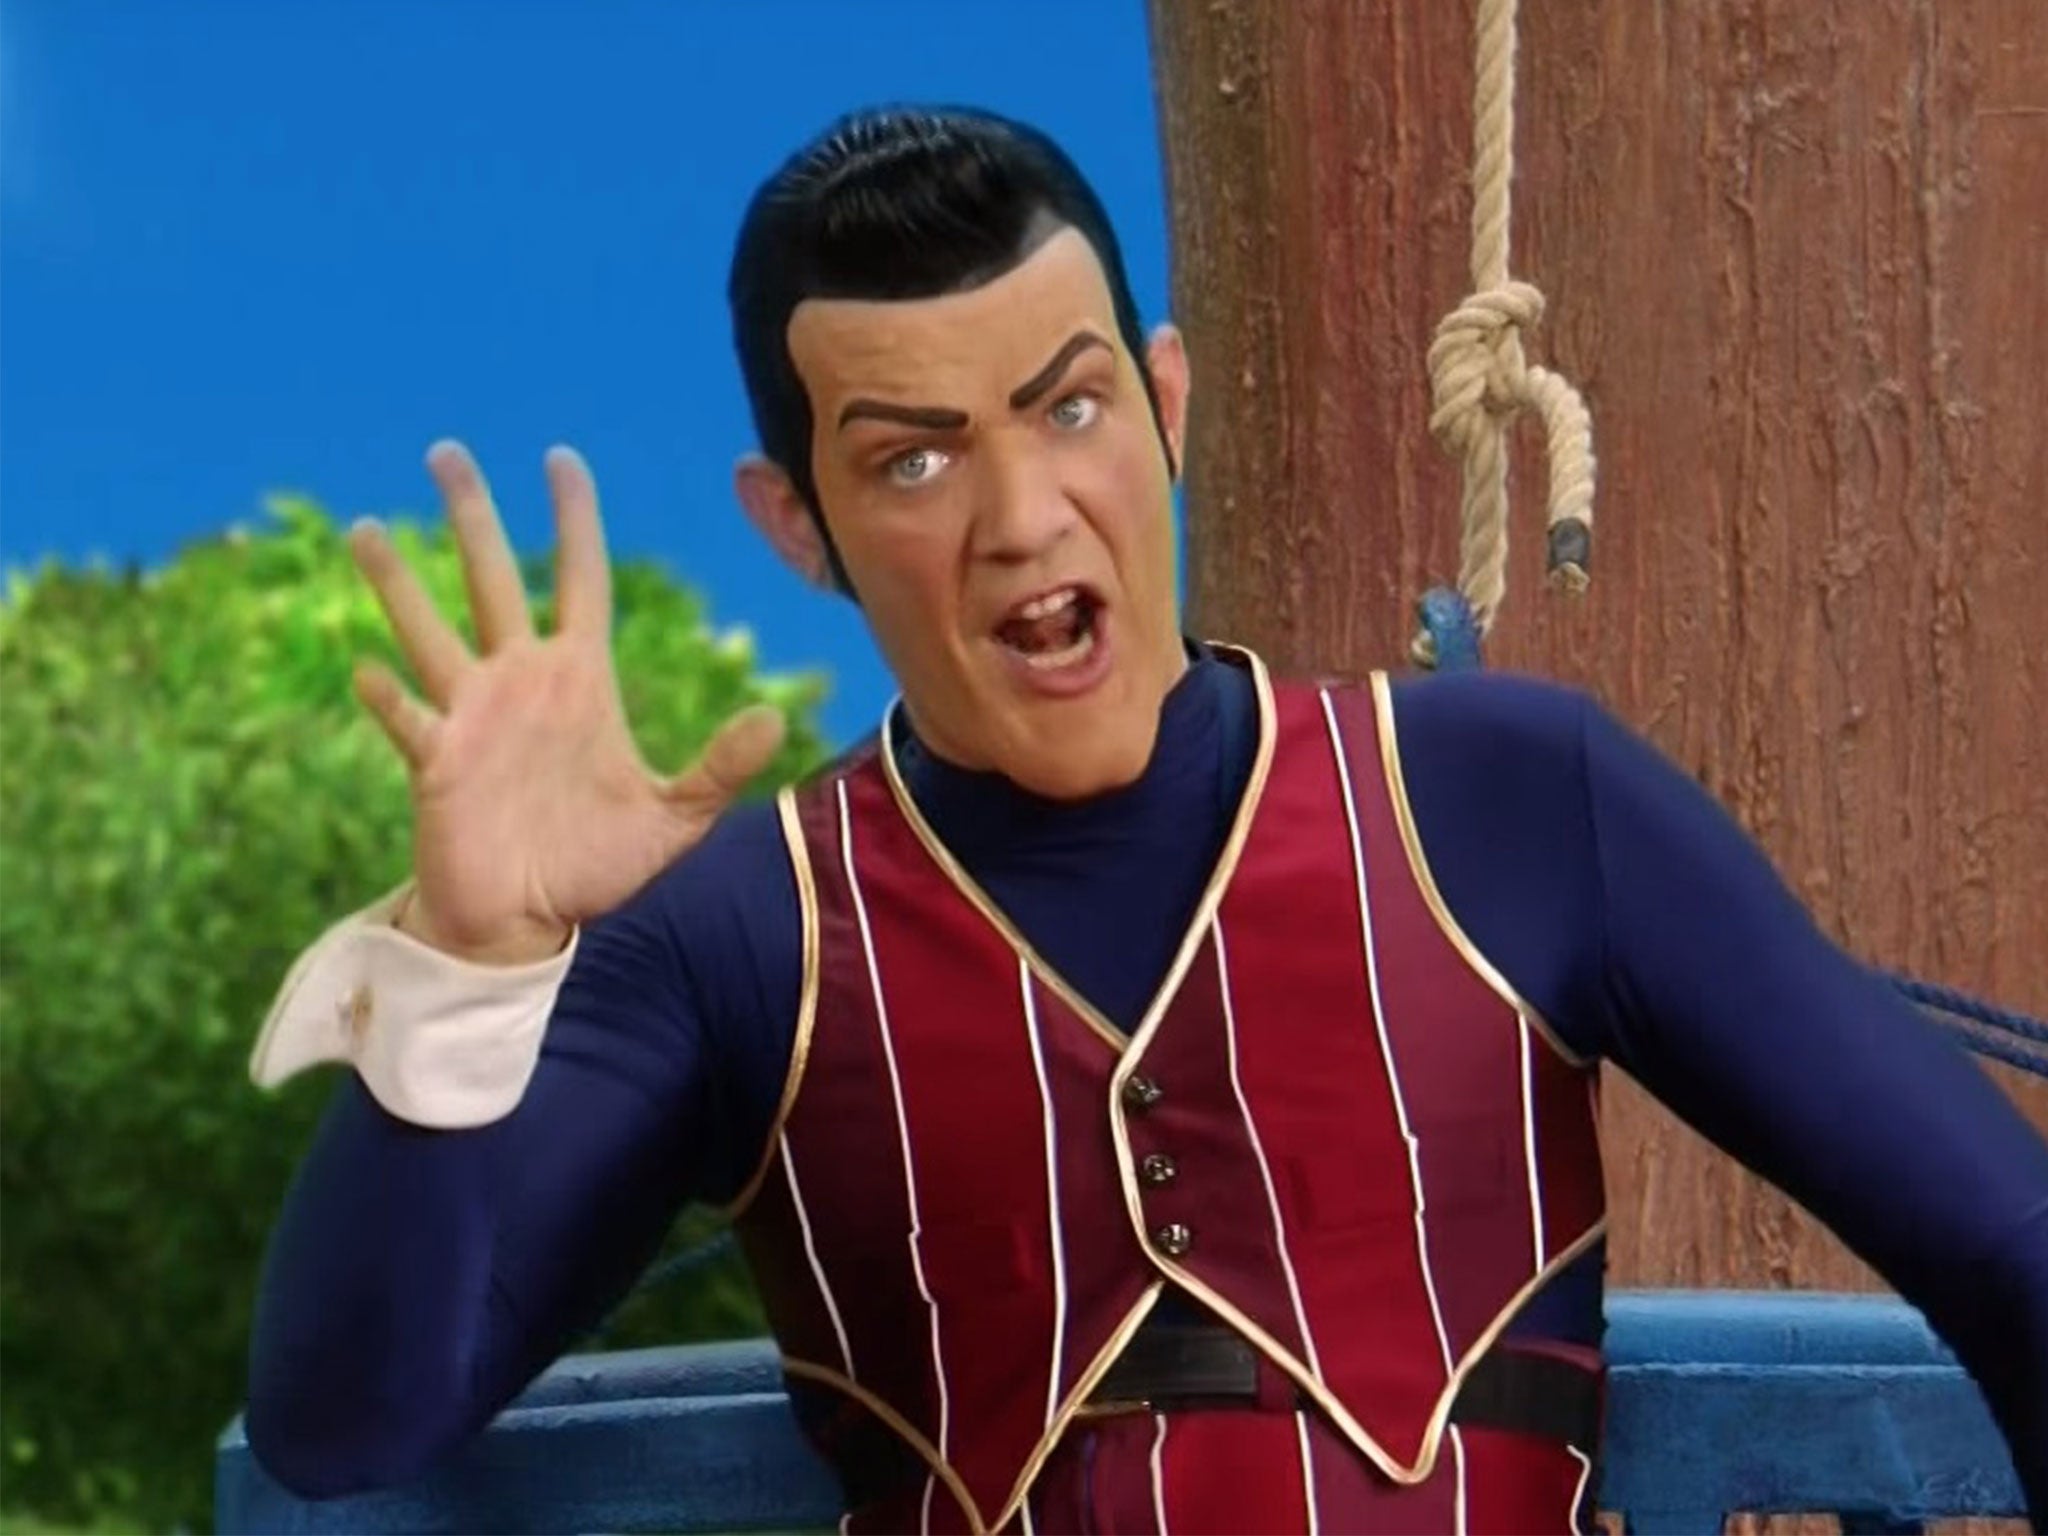 Happy 46th birthday to actor Who played Robbie rotten From lazy town the late Stefán Karl Stefánsson
Your dude. 